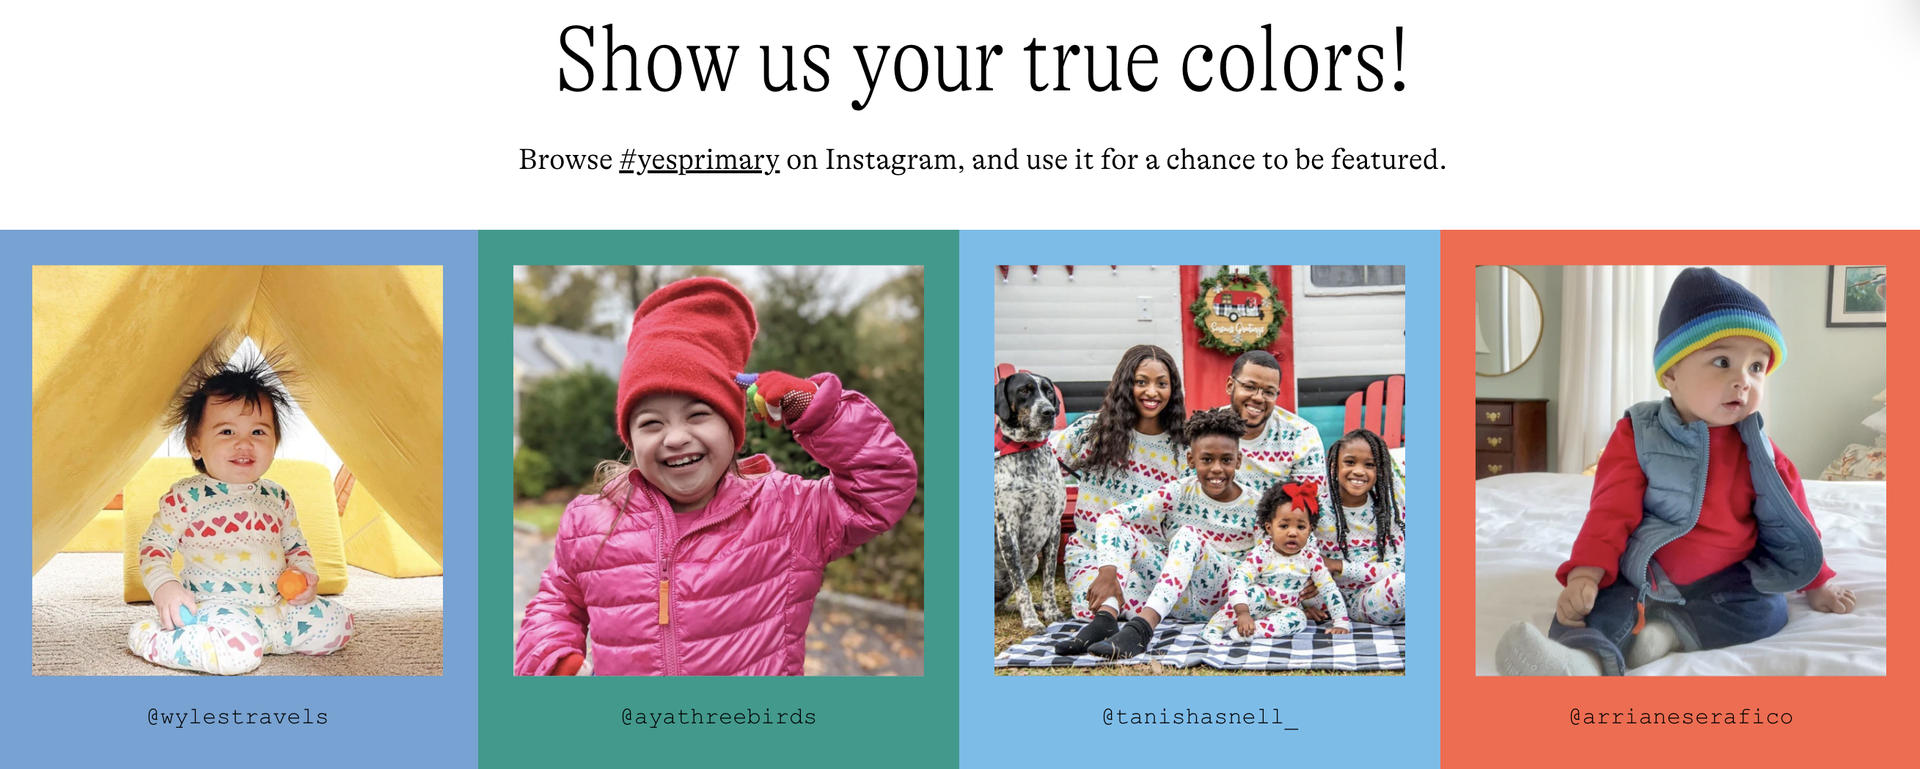 Three customer-generated images of young, happy children on Instagram wearing Primary.com clothing